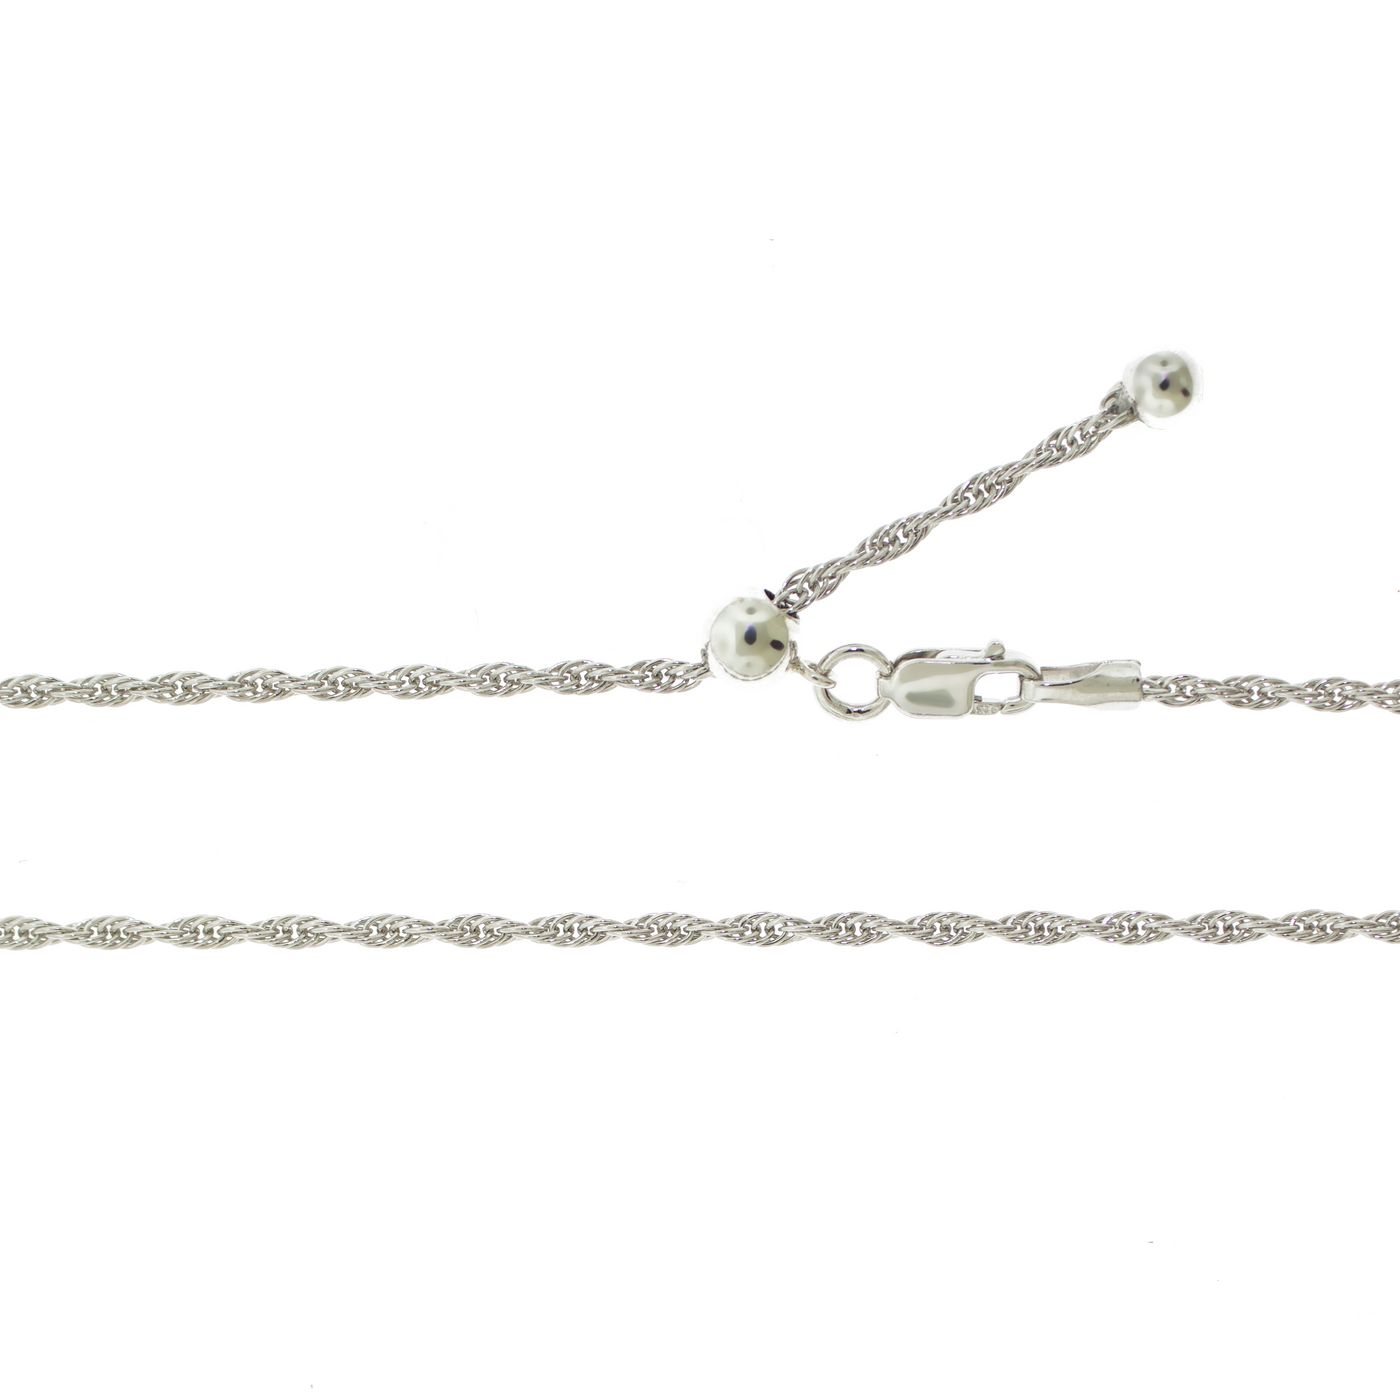 Adjustable Loose Rope Chain